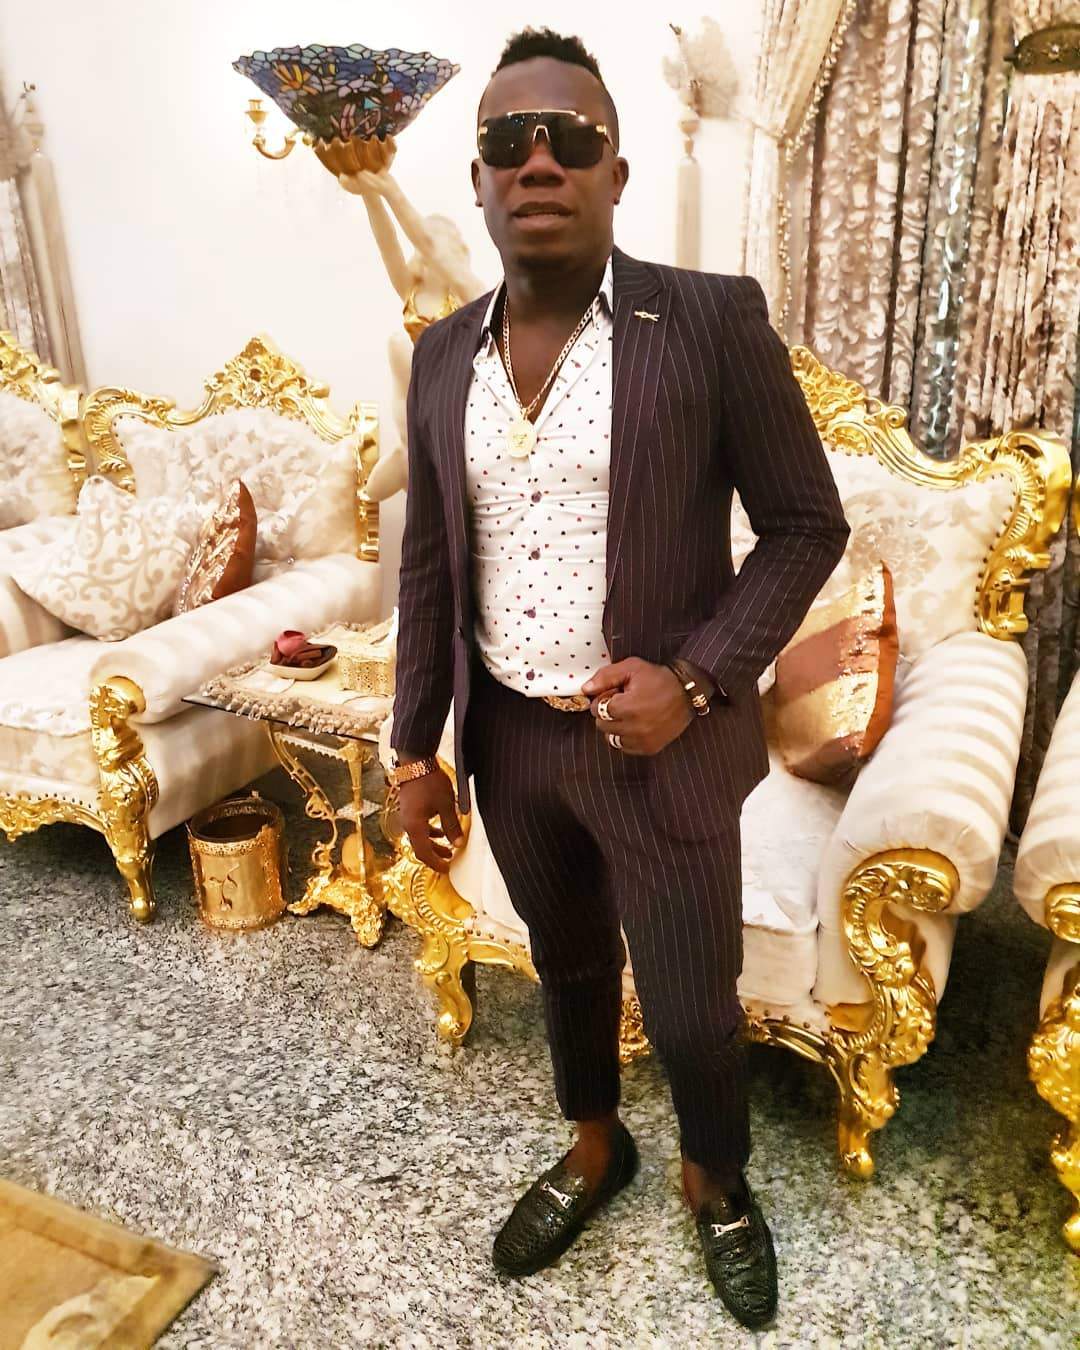 Duncan Mighty released by Police after arrest over alleged N11M fraud